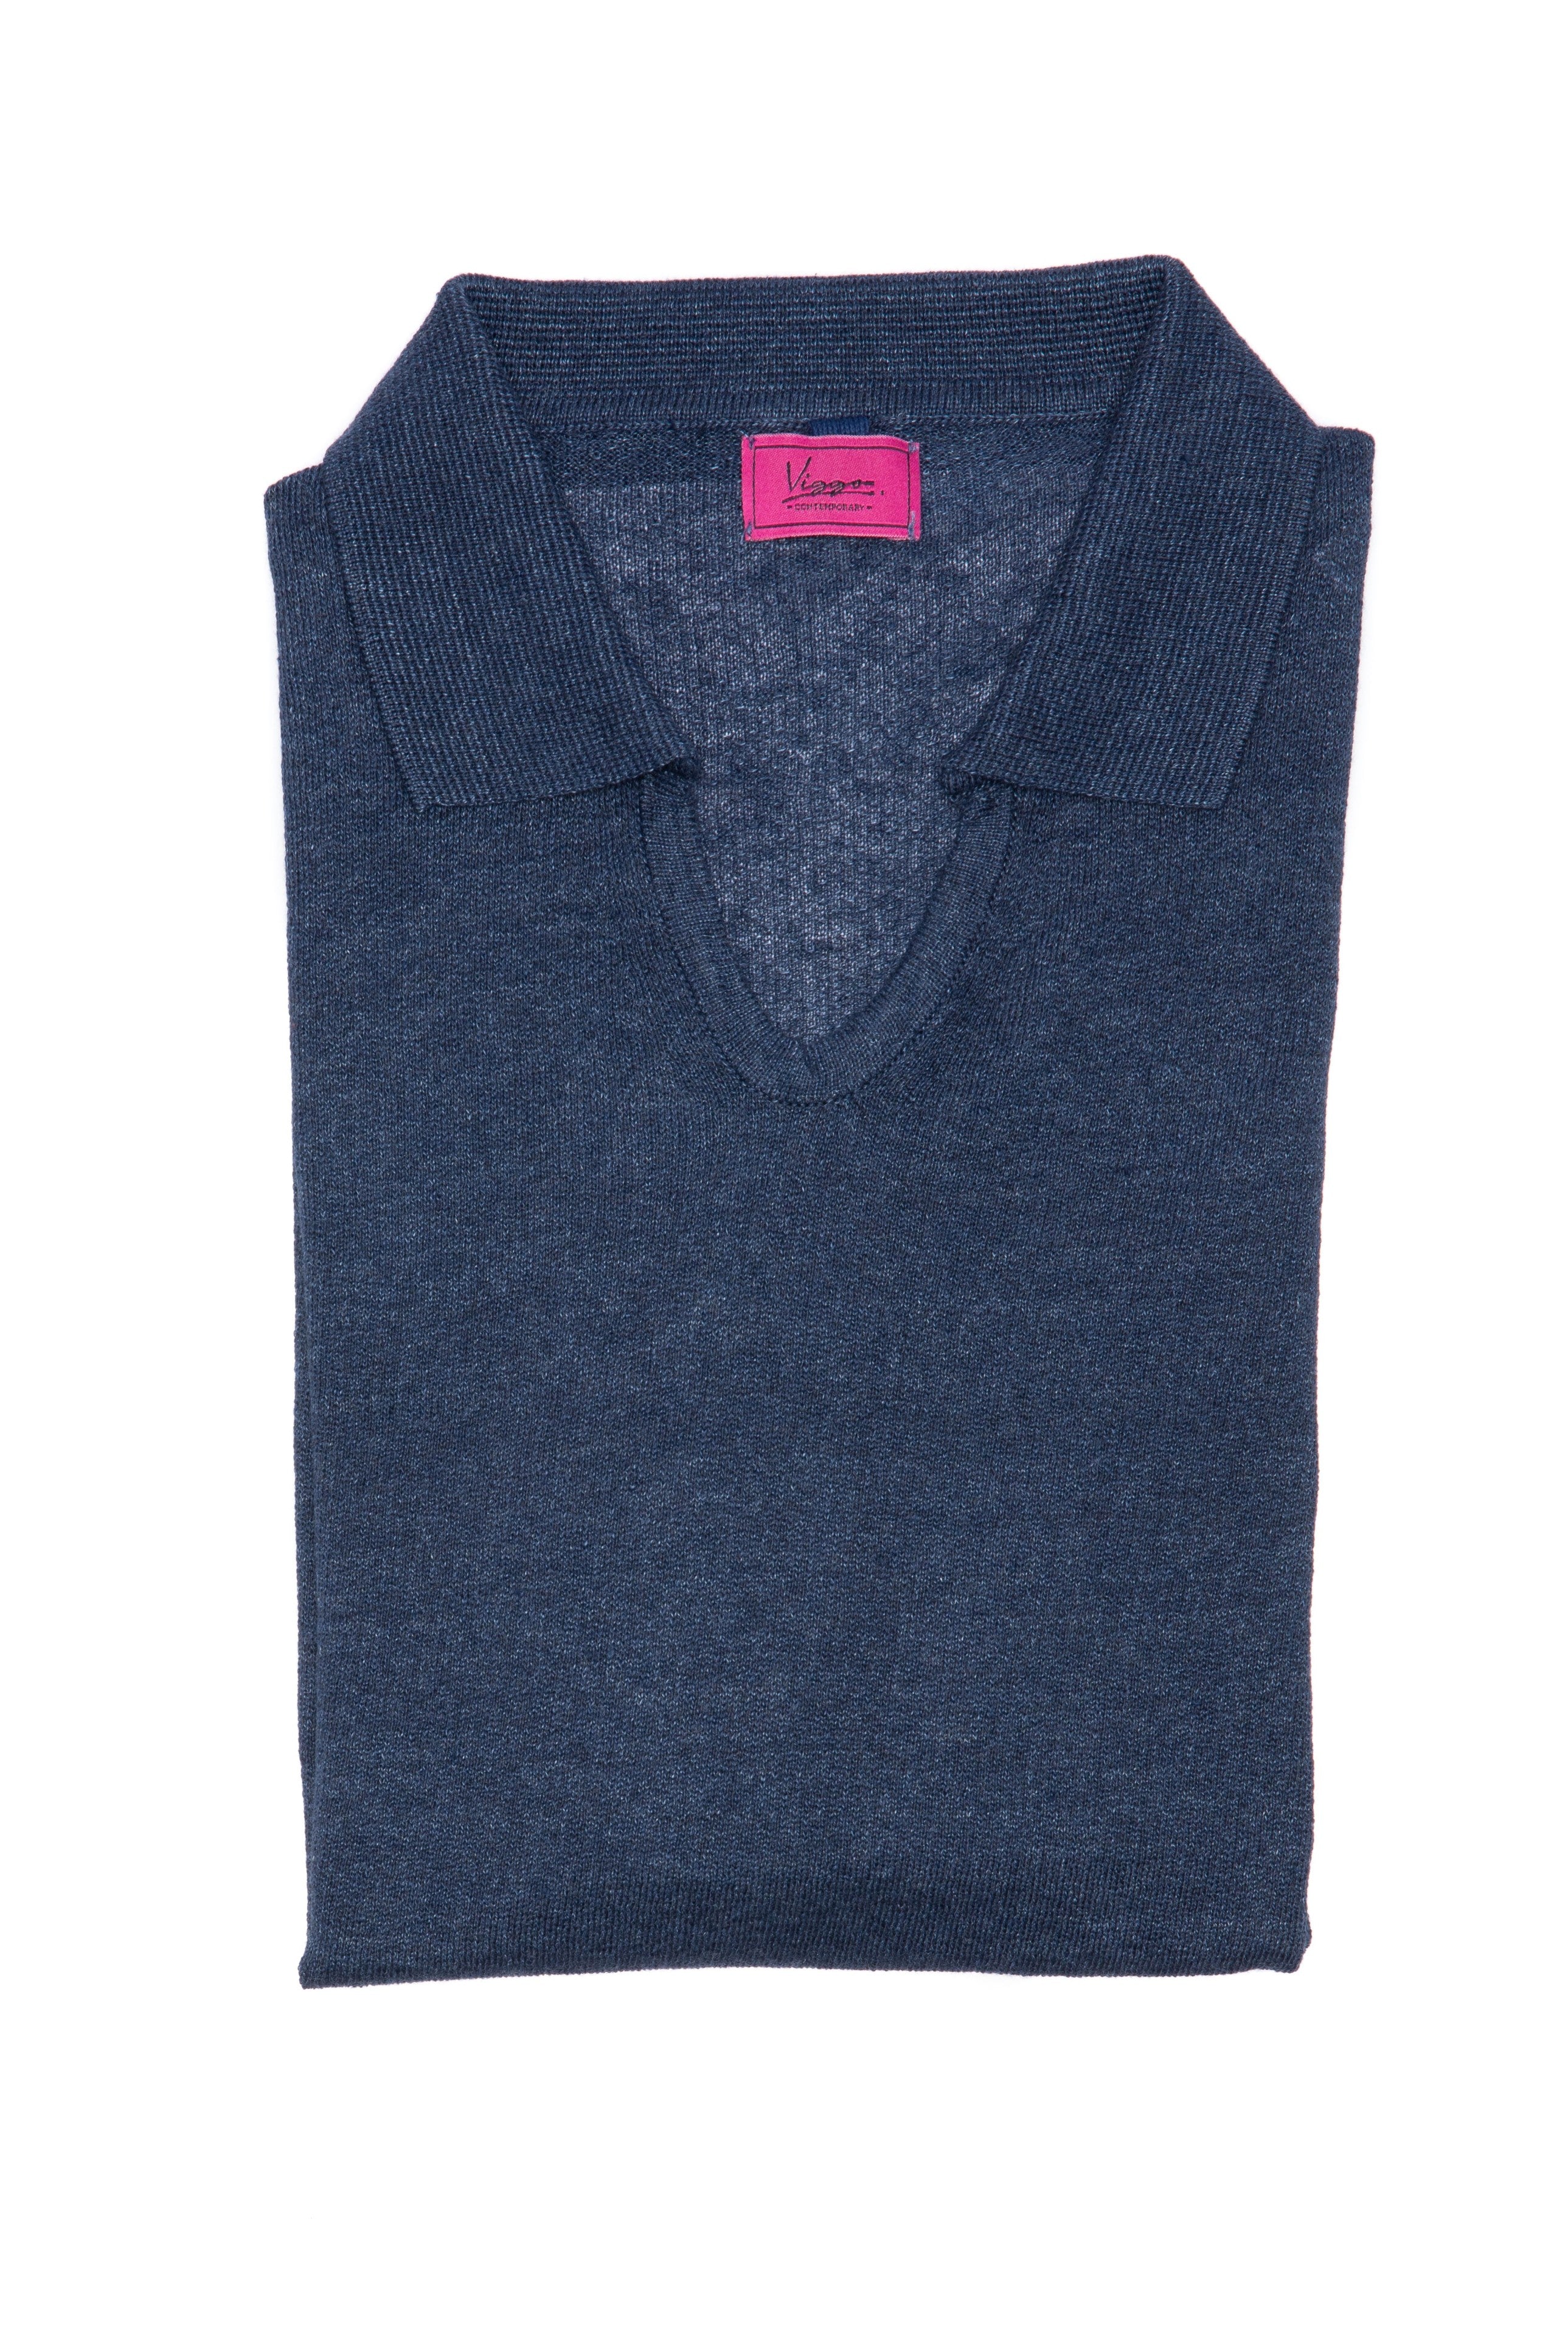 Navy blue casual t-shirt with polo collar